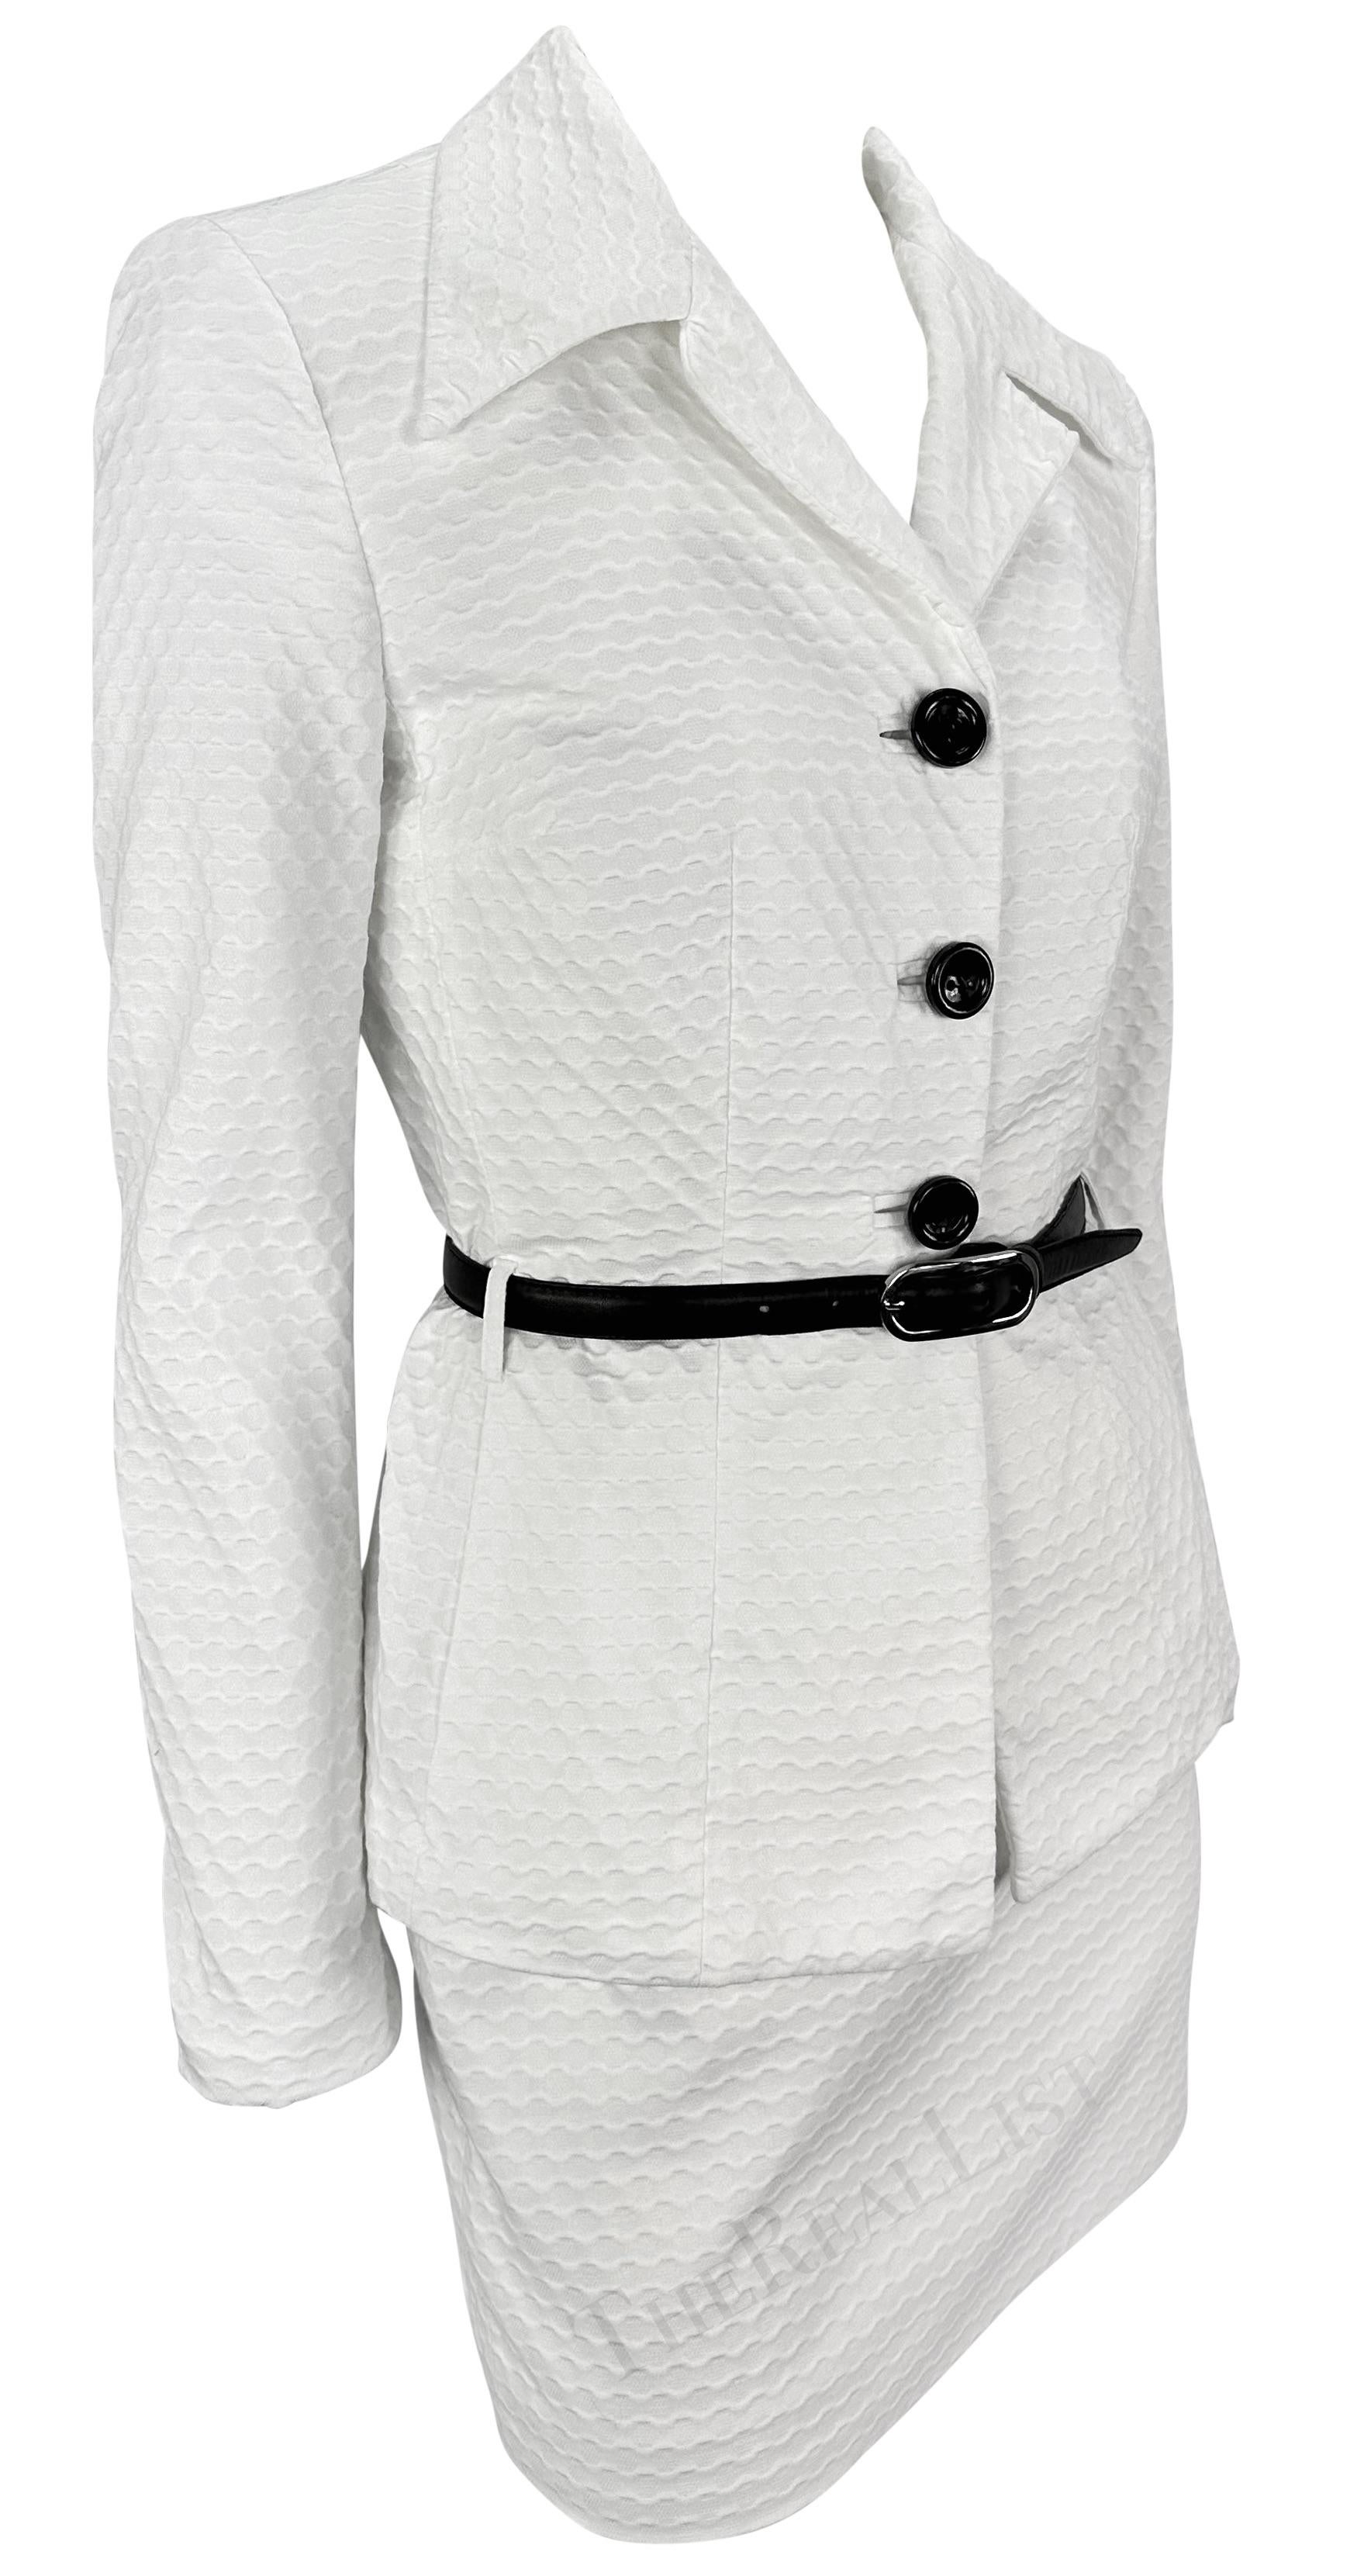 S/S 1995 Dolce & Gabbana Belted White Waffle Knit Mini Skirt Suit For Sale 3